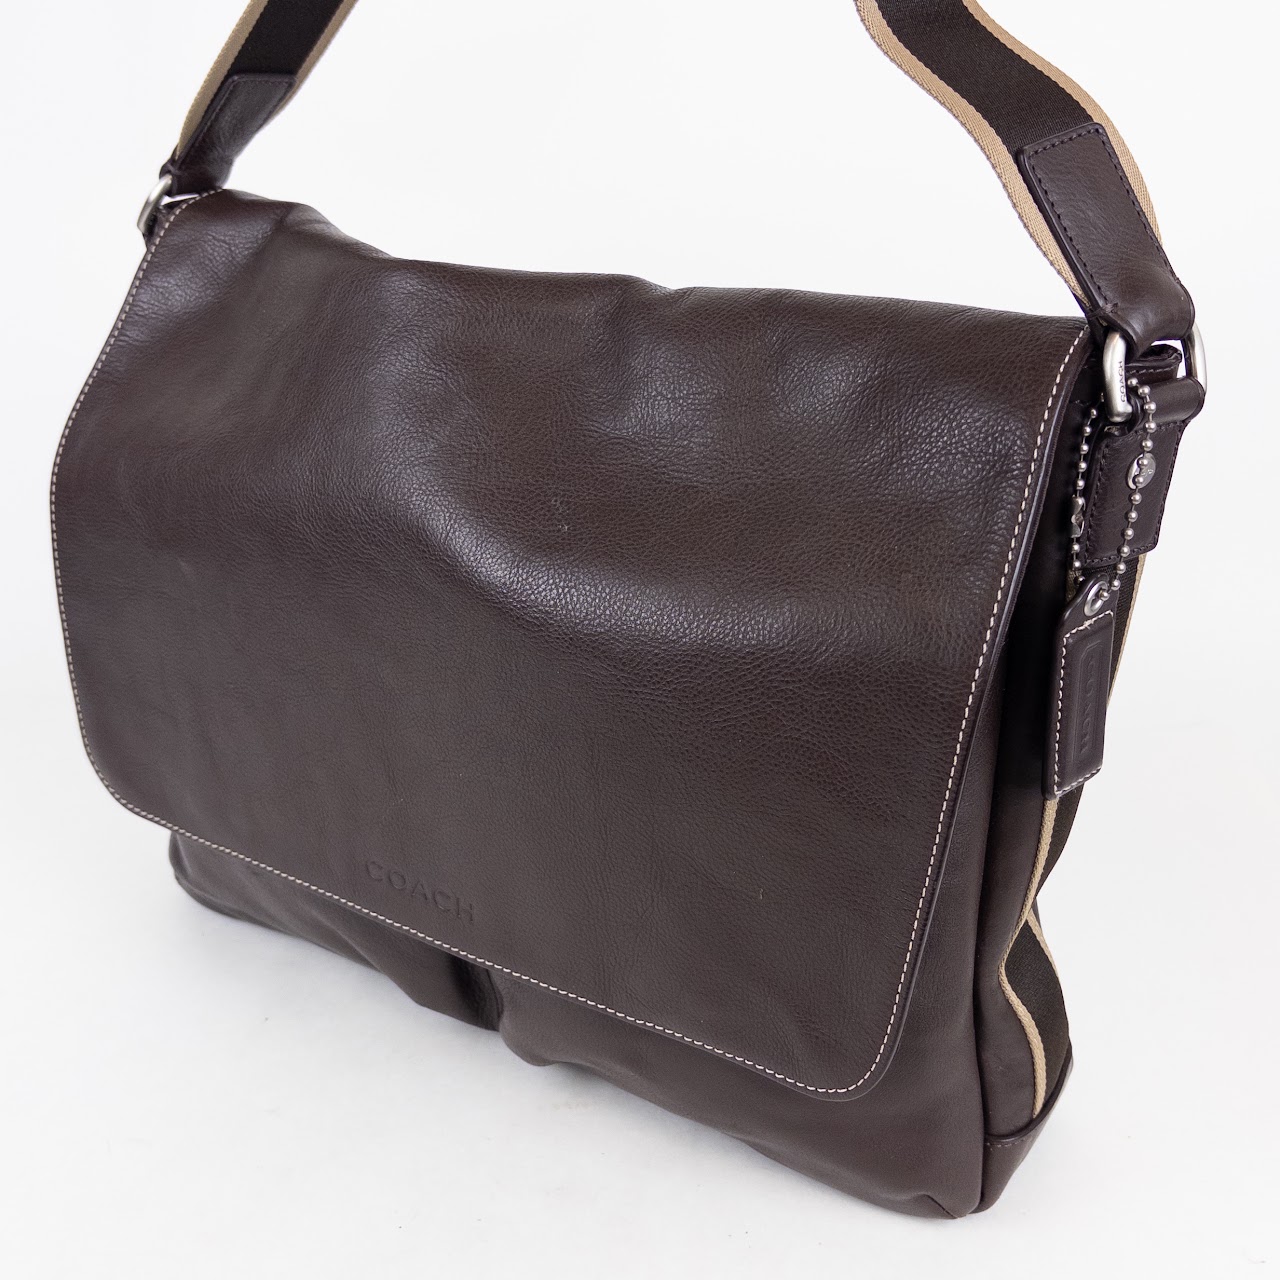 Coach Brown Leather Messenger Bag